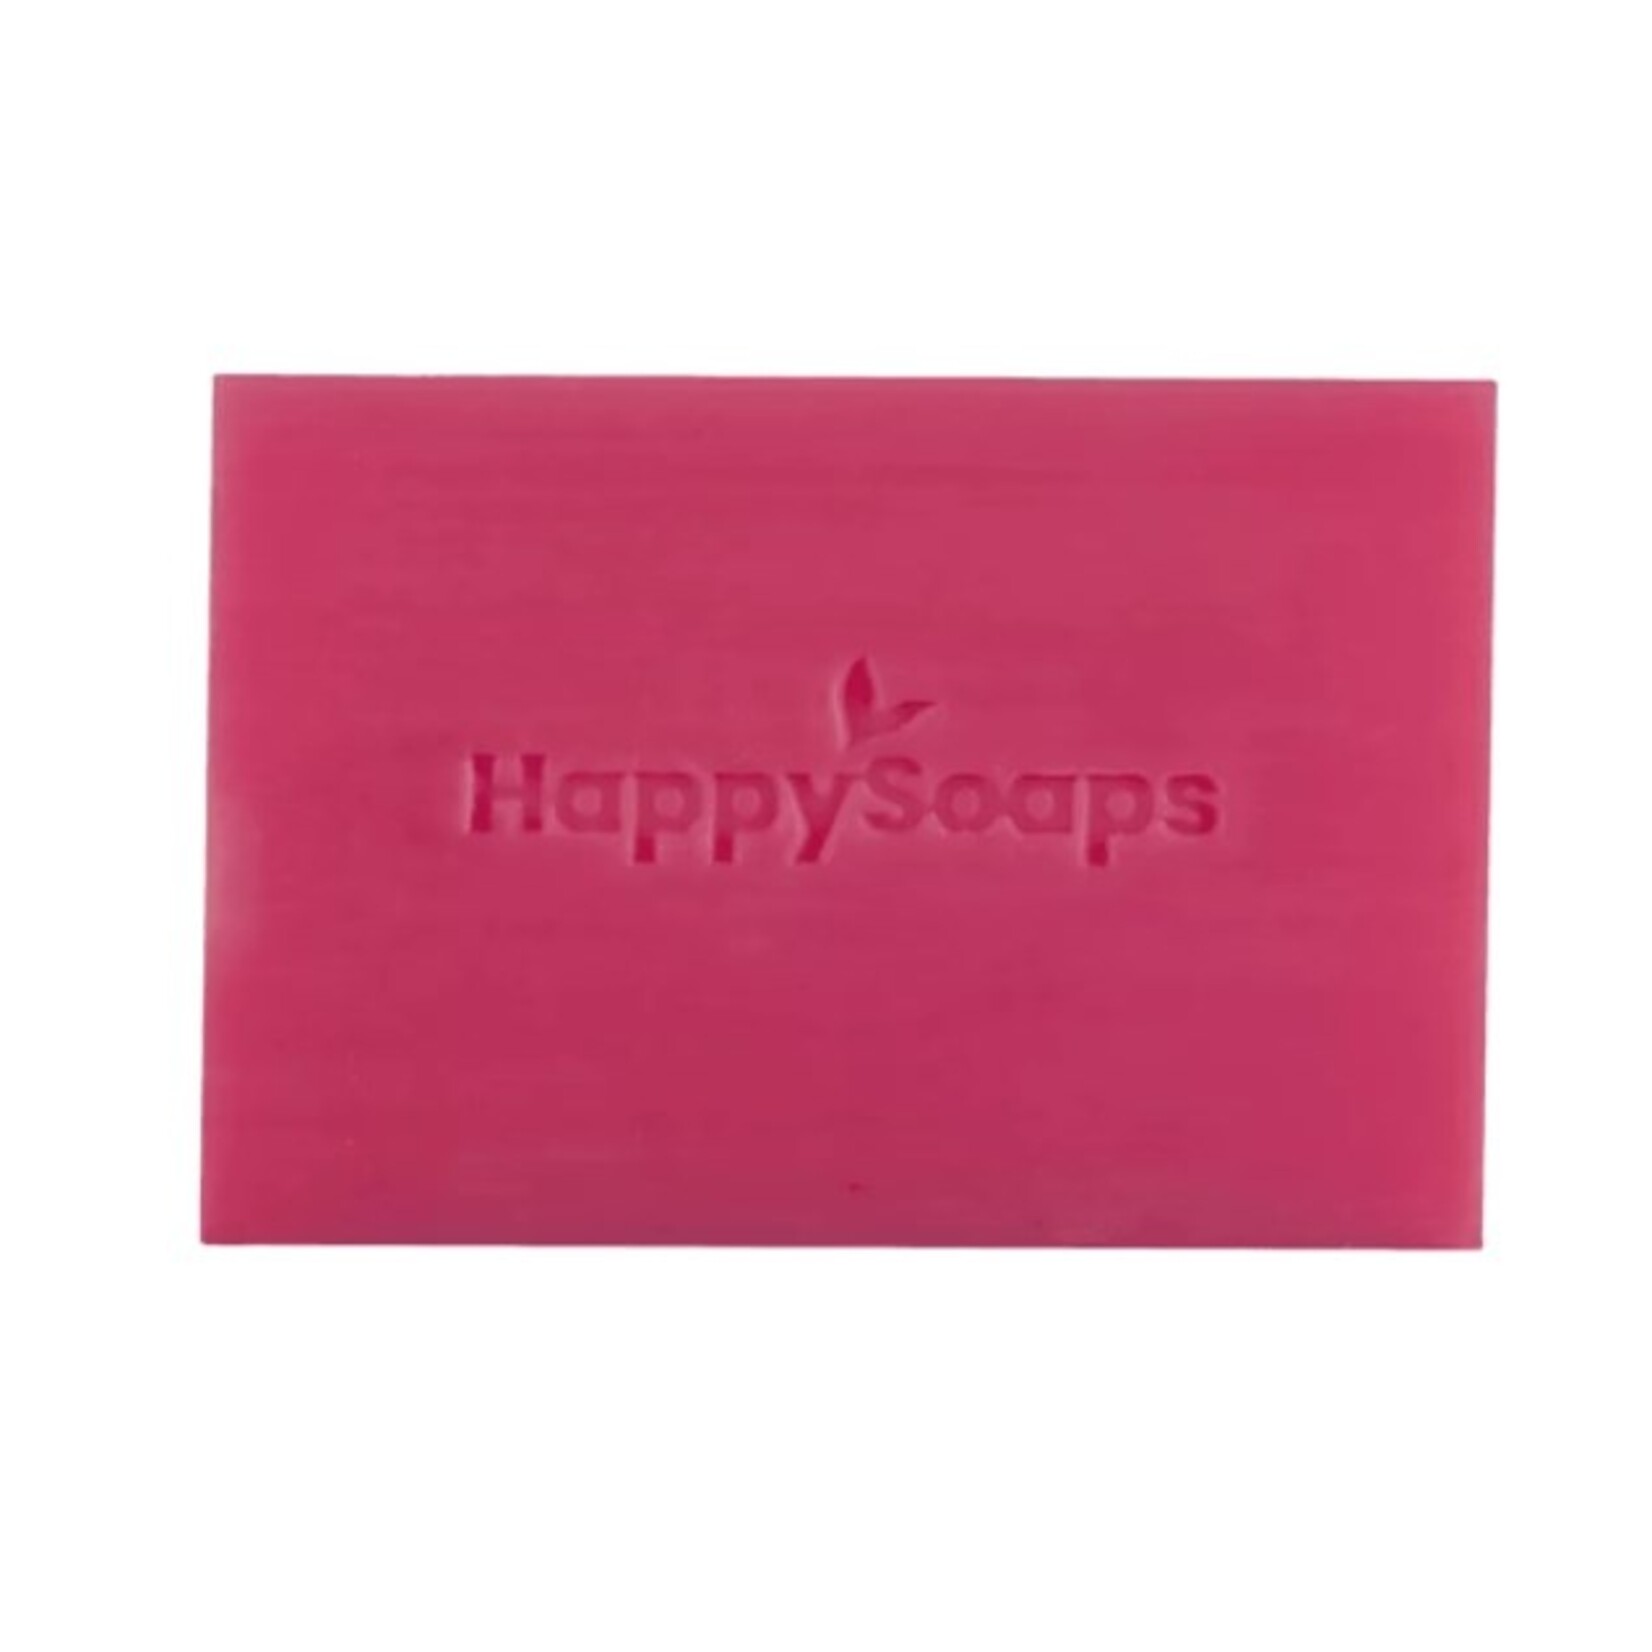 HappySoaps HappySoaps Body Bar - You're One in a Melon